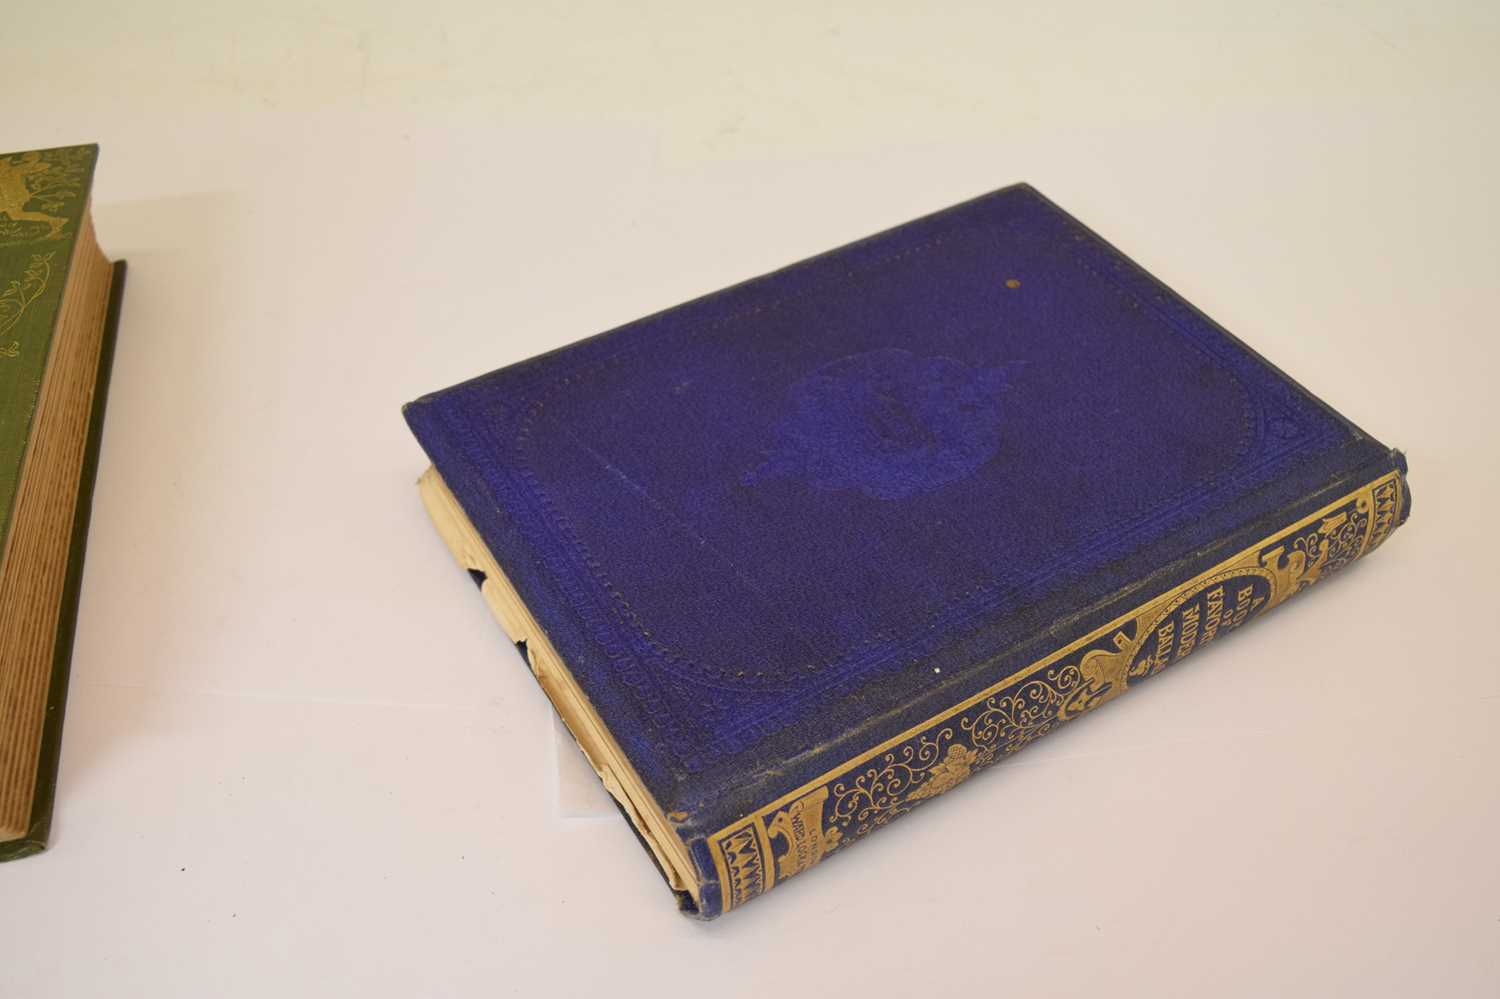 Potter, Beatrix - 'Cecily Parsley's Nursery Rhymes' - First edition - Image 32 of 37